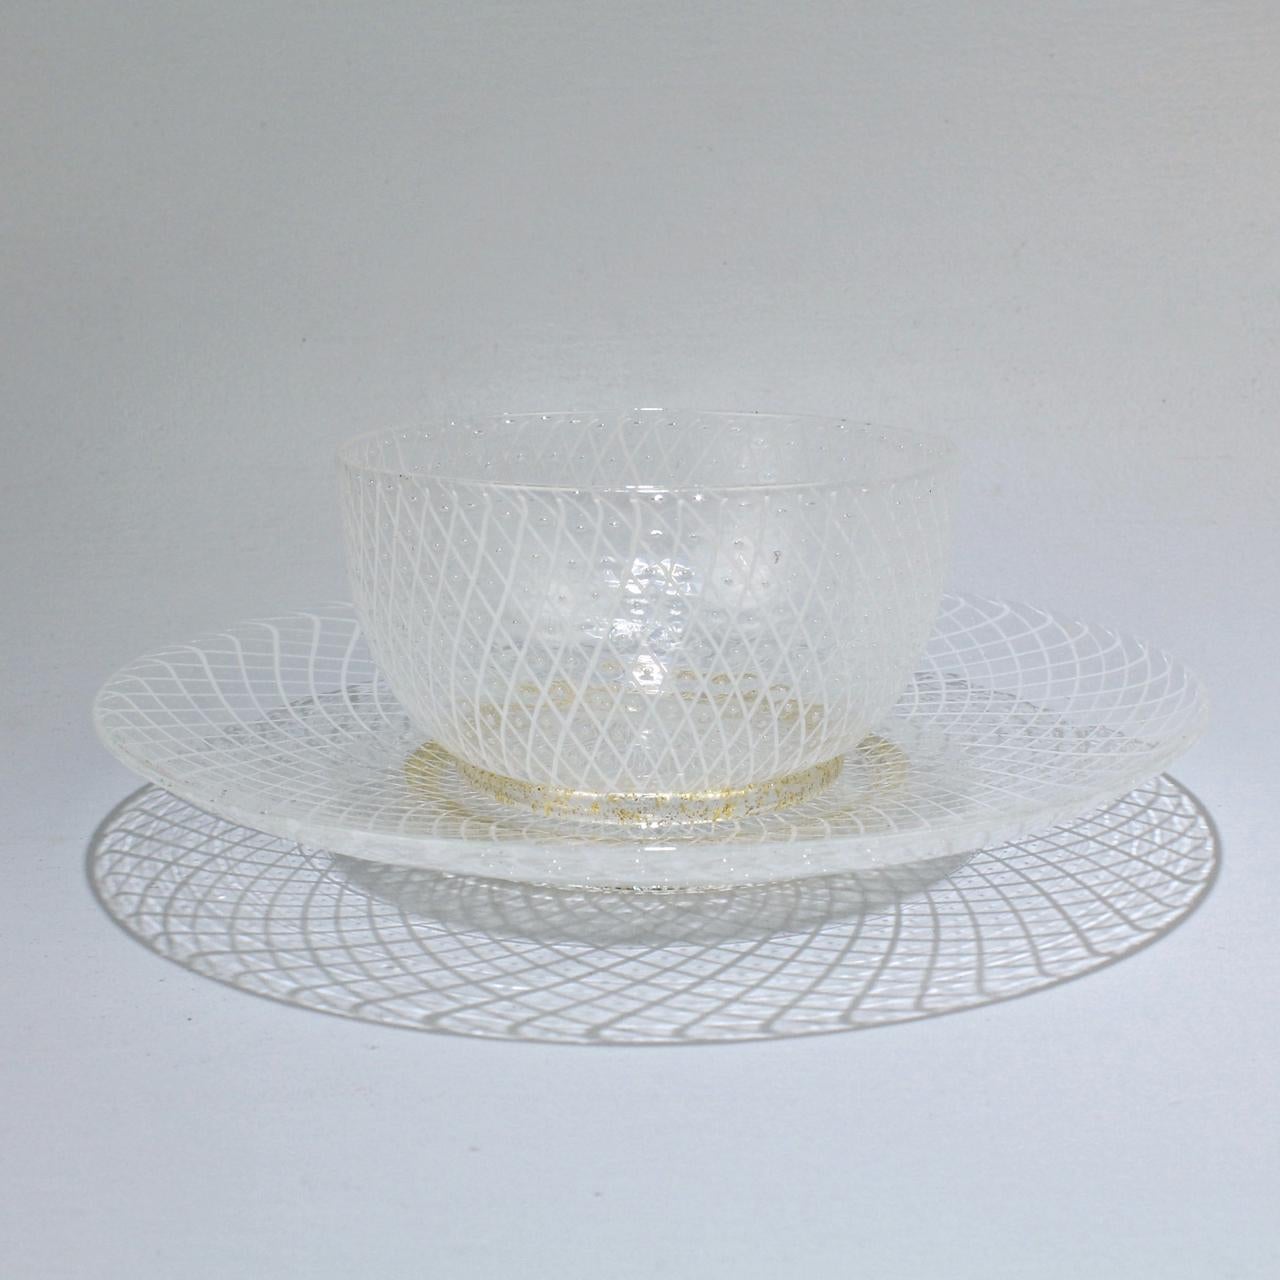 An elegant set of 10 Venetian glass bowls and underplates.

Attributed to Seguso.

Each piece is finely decorated in the reticulo filigrana technique (which consists of individual white glass rods in a diamond mesh pattern that is punctuated by